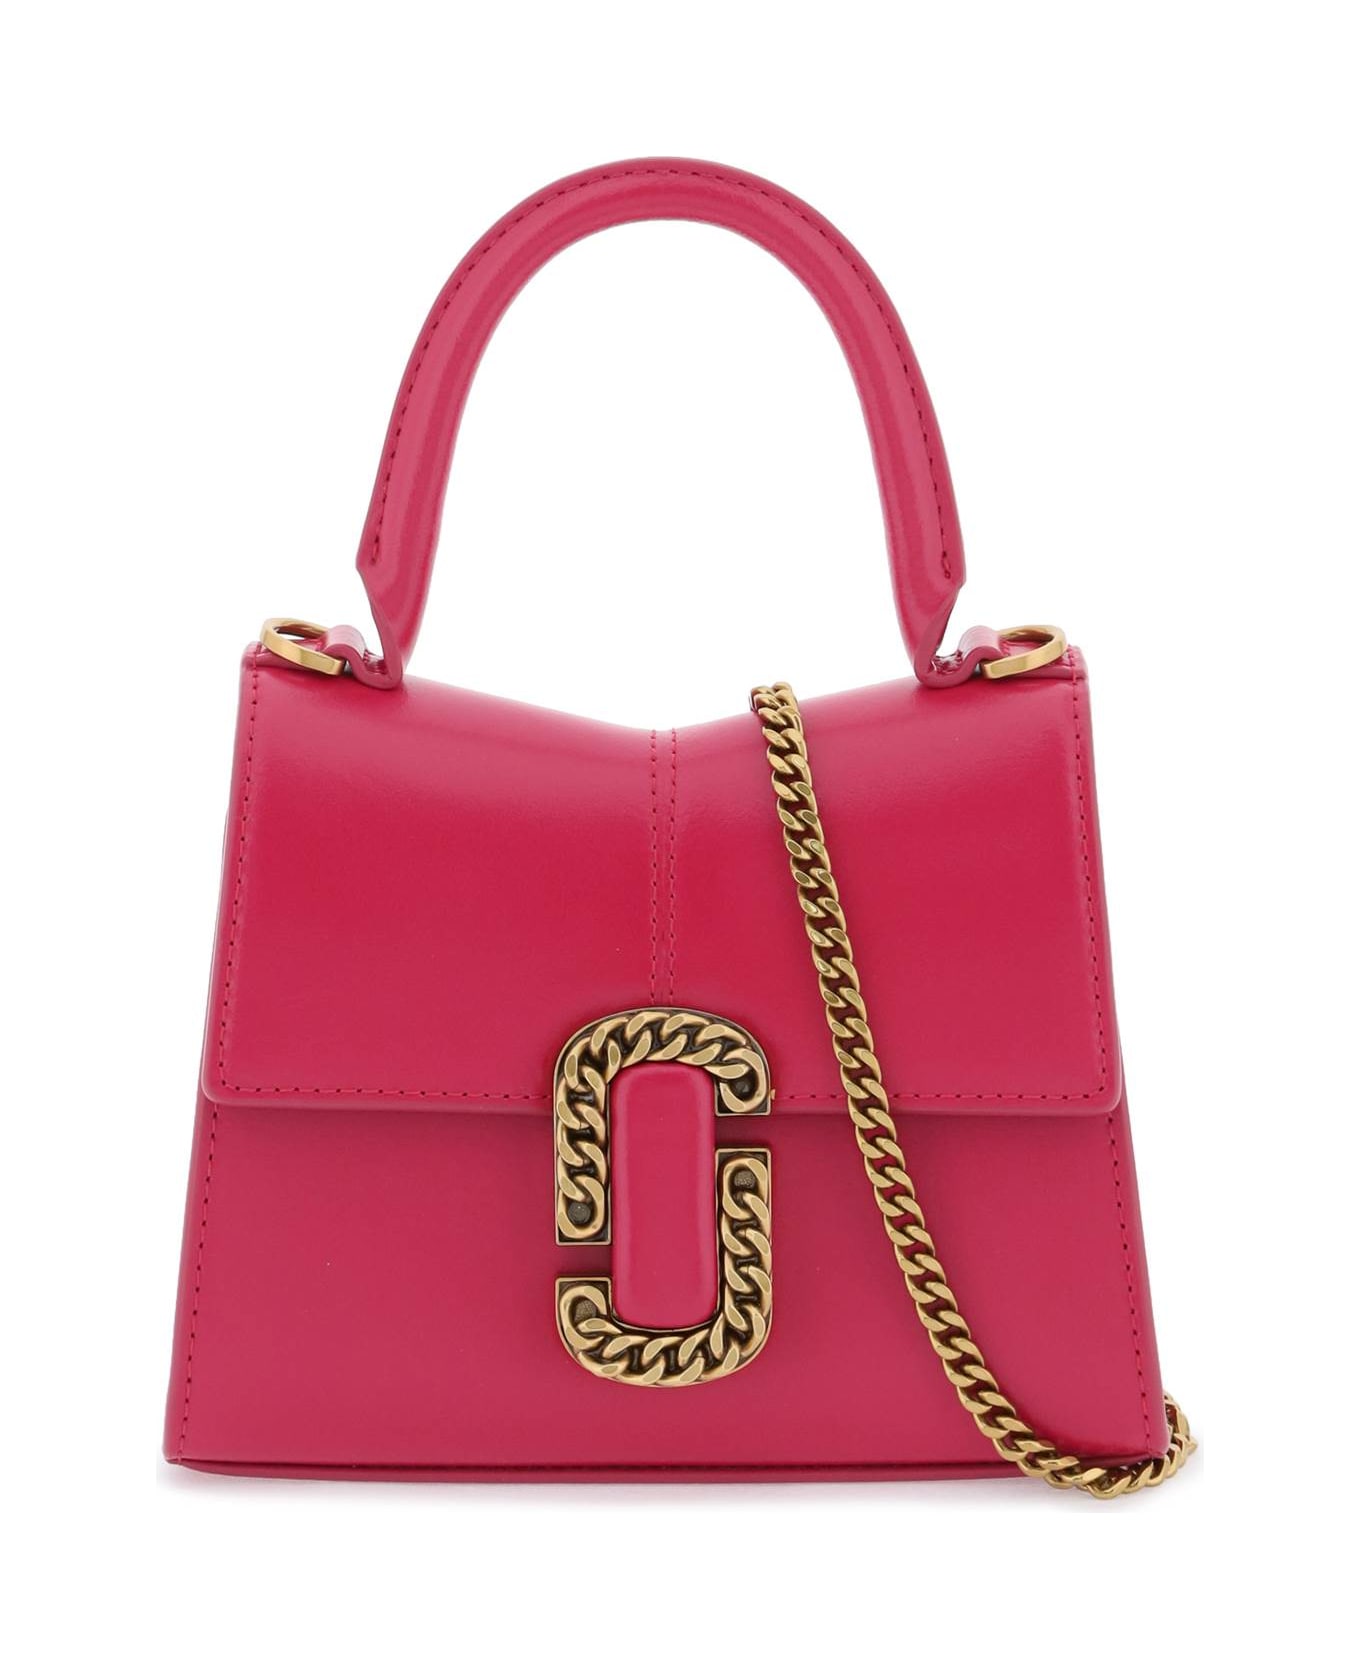 Marc Jacobs The St. Marc Mini Top Handle Bag - LIPSTICK PINK (Pink)